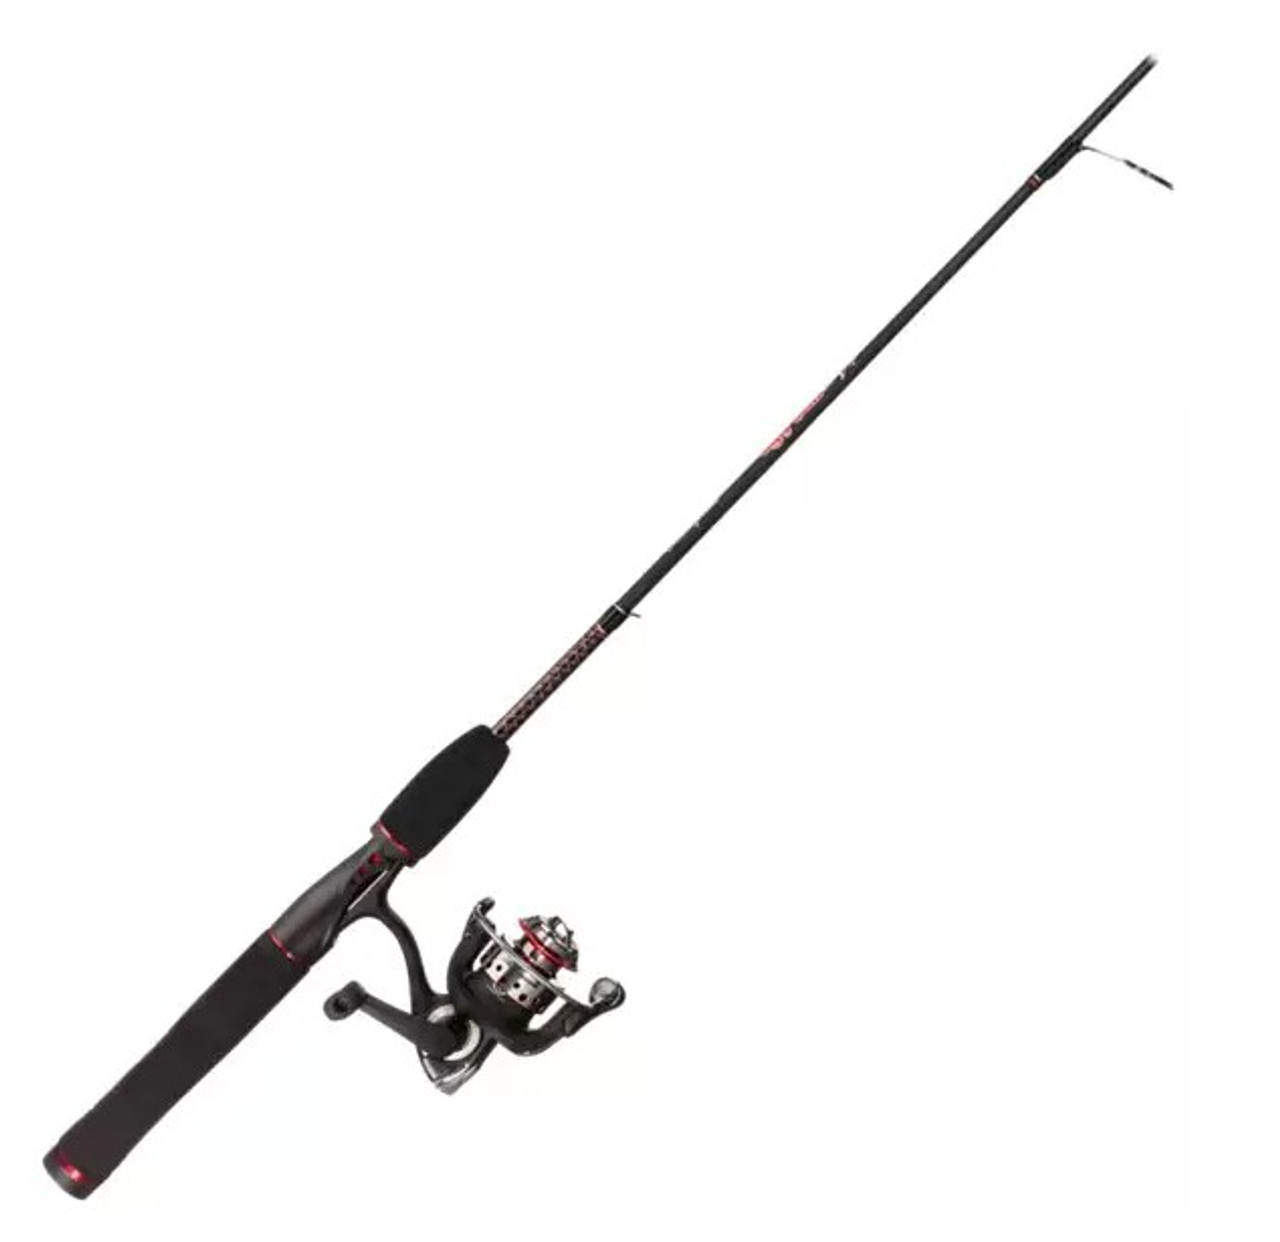 Ugly Stik GX2 Spinning Rod and Reel Combo - 5' - (USSP502L/25CBO) - Black -  Ramsey Outdoor